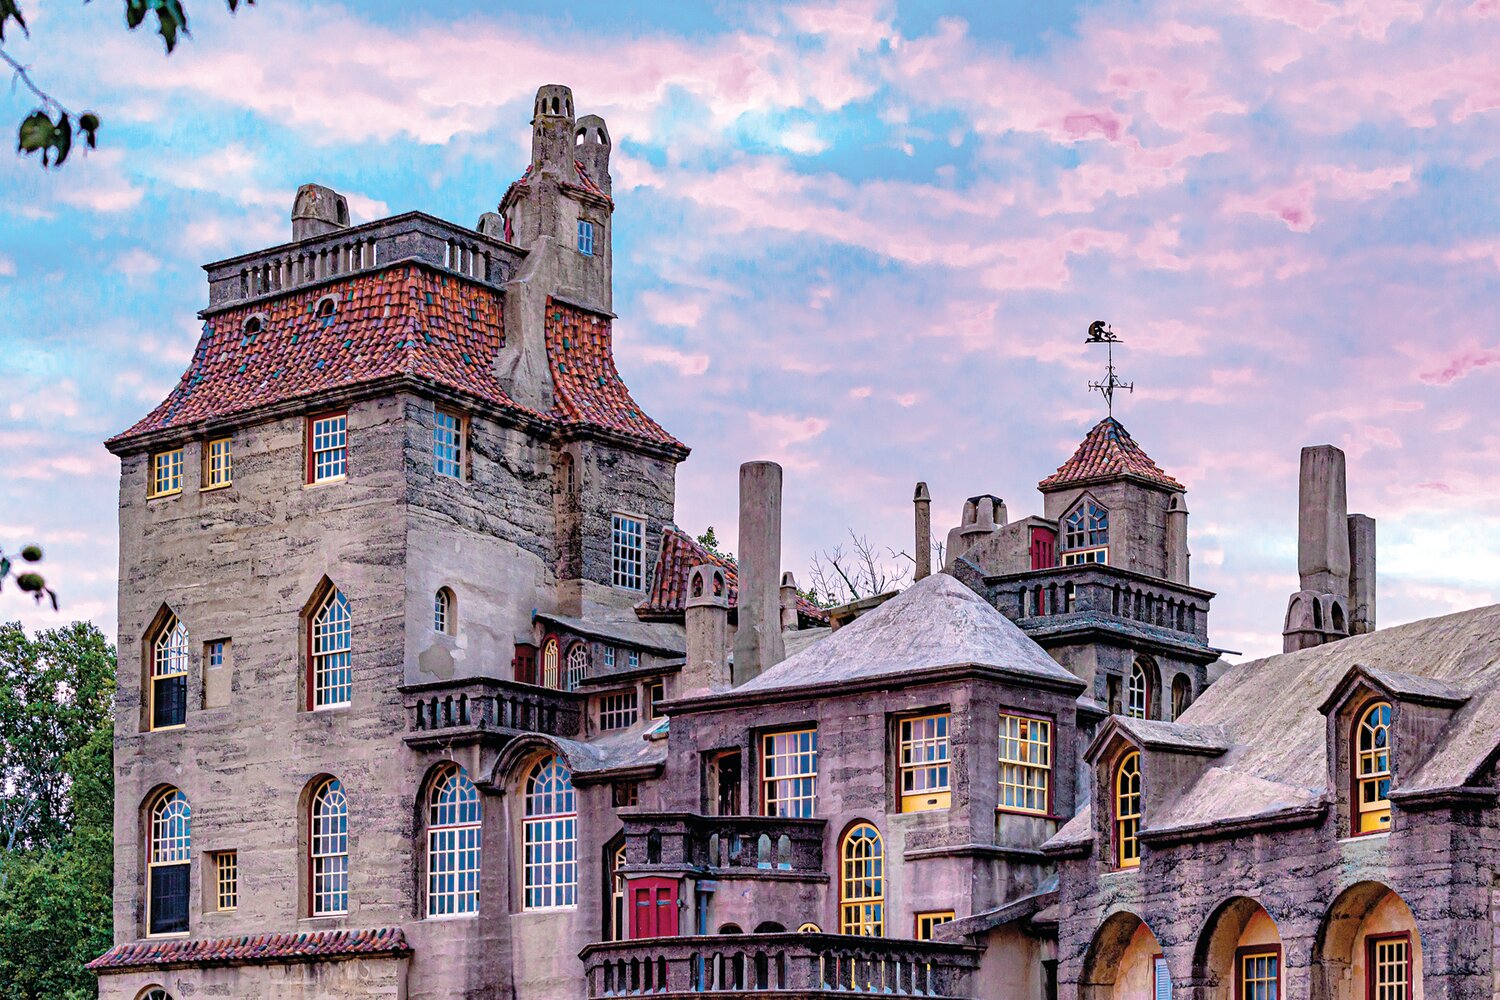 Evening tours show off Fonthill Castle in a different light.